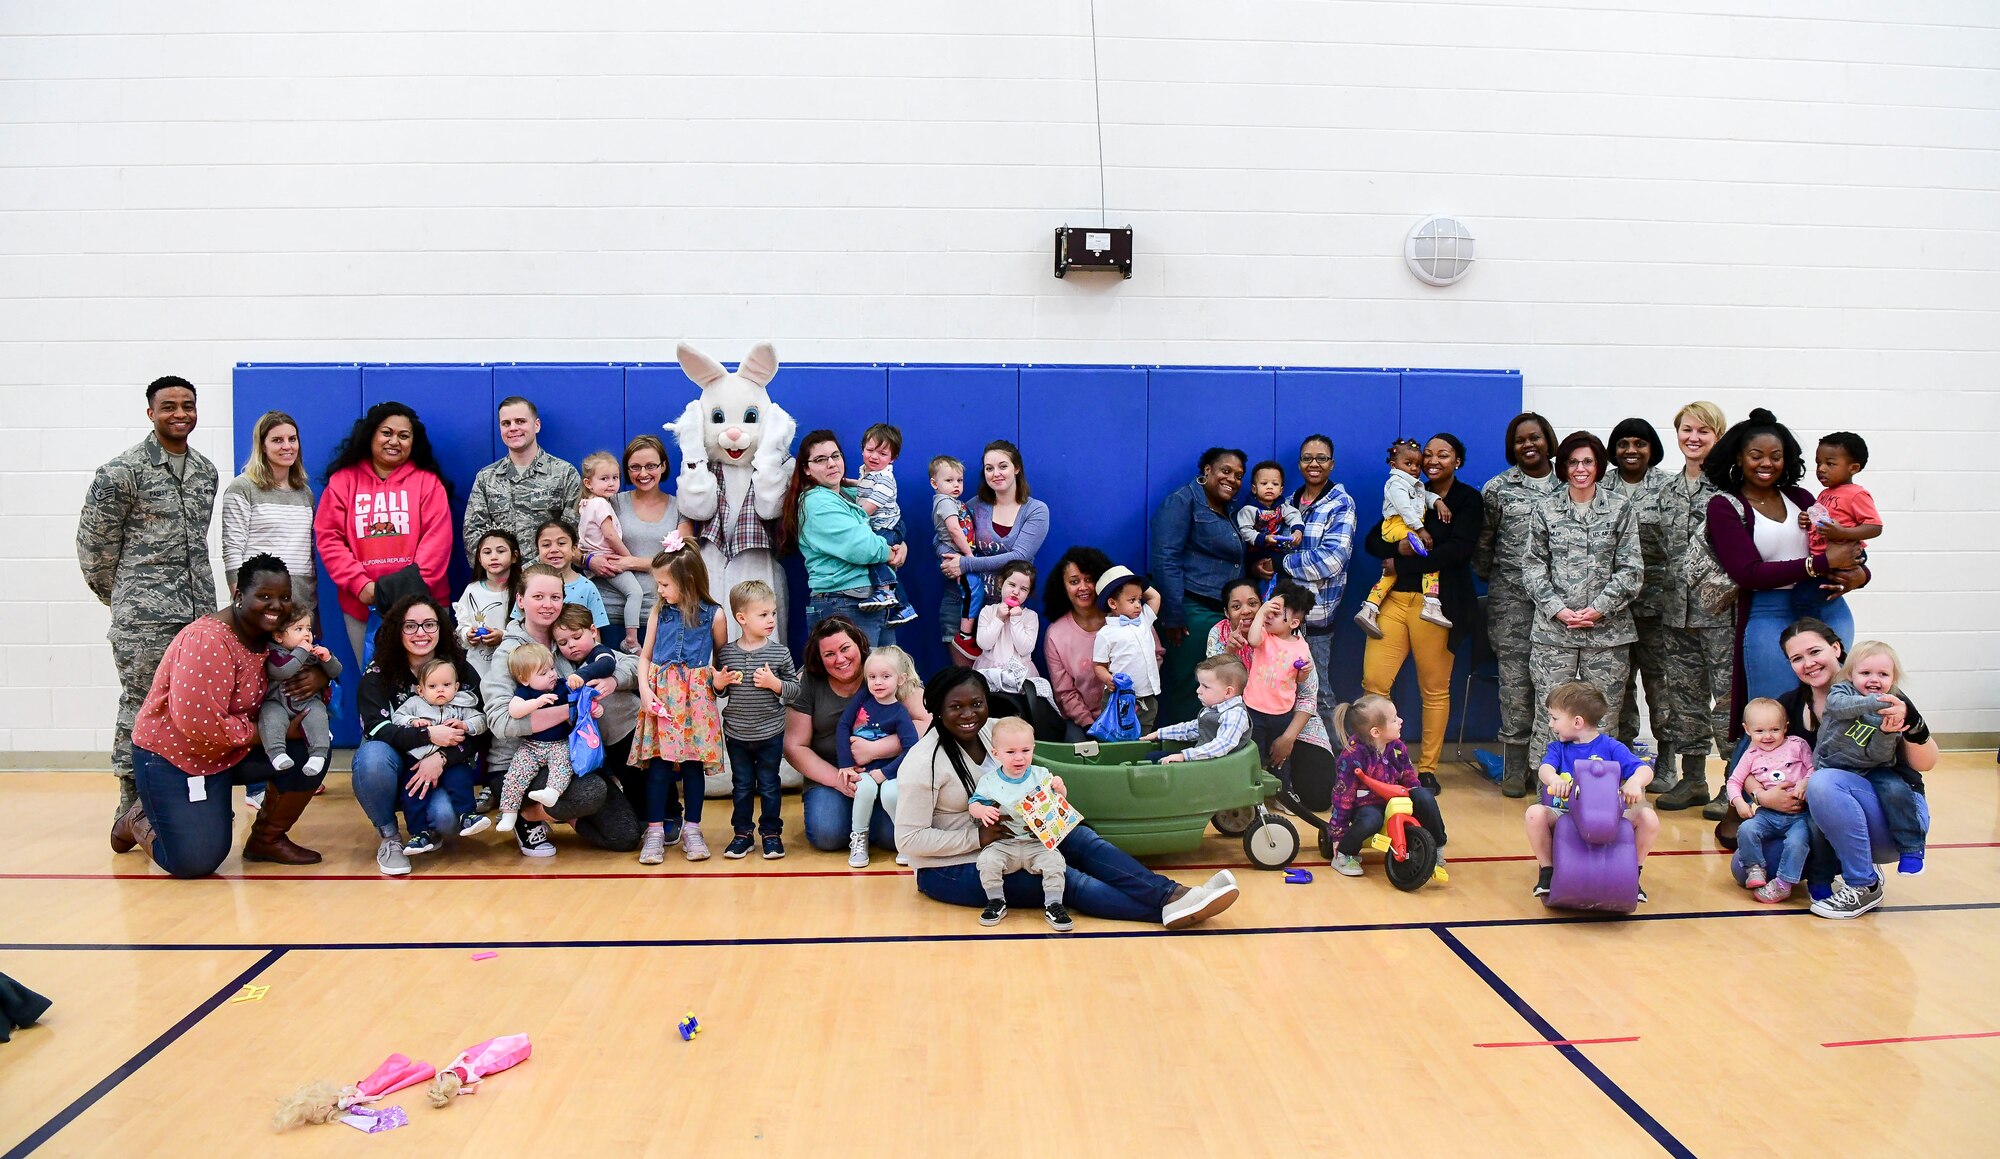 Participants of the Family Advocacy Program’s Play Group Easter Egg Hunt held in recognition of National Child Abuse Prevention Month gather on April 17, 2019, at Dover Air Force Base, Del. Over 40 people participated, including the Easter Bunny. (U.S. Air Force photo by Senior Airman Christopher Quail)